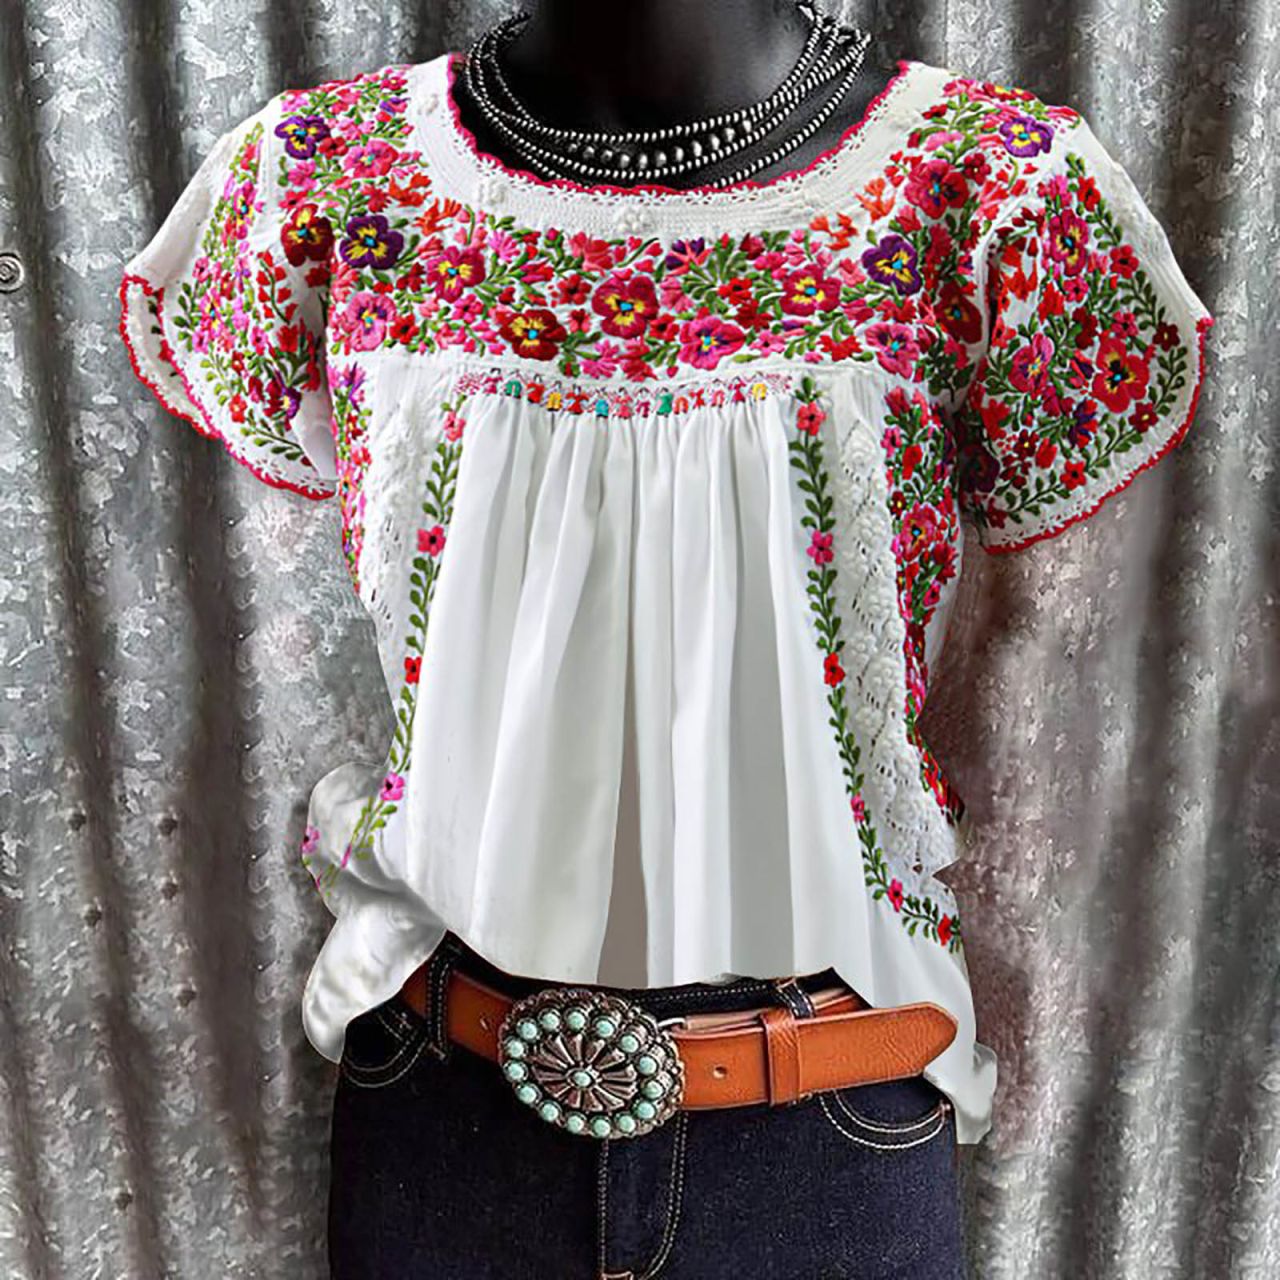 Mexico believes that Patowl's "casual flowers" shirts borrow from the embroidery techniques of the country's Zapotec community.